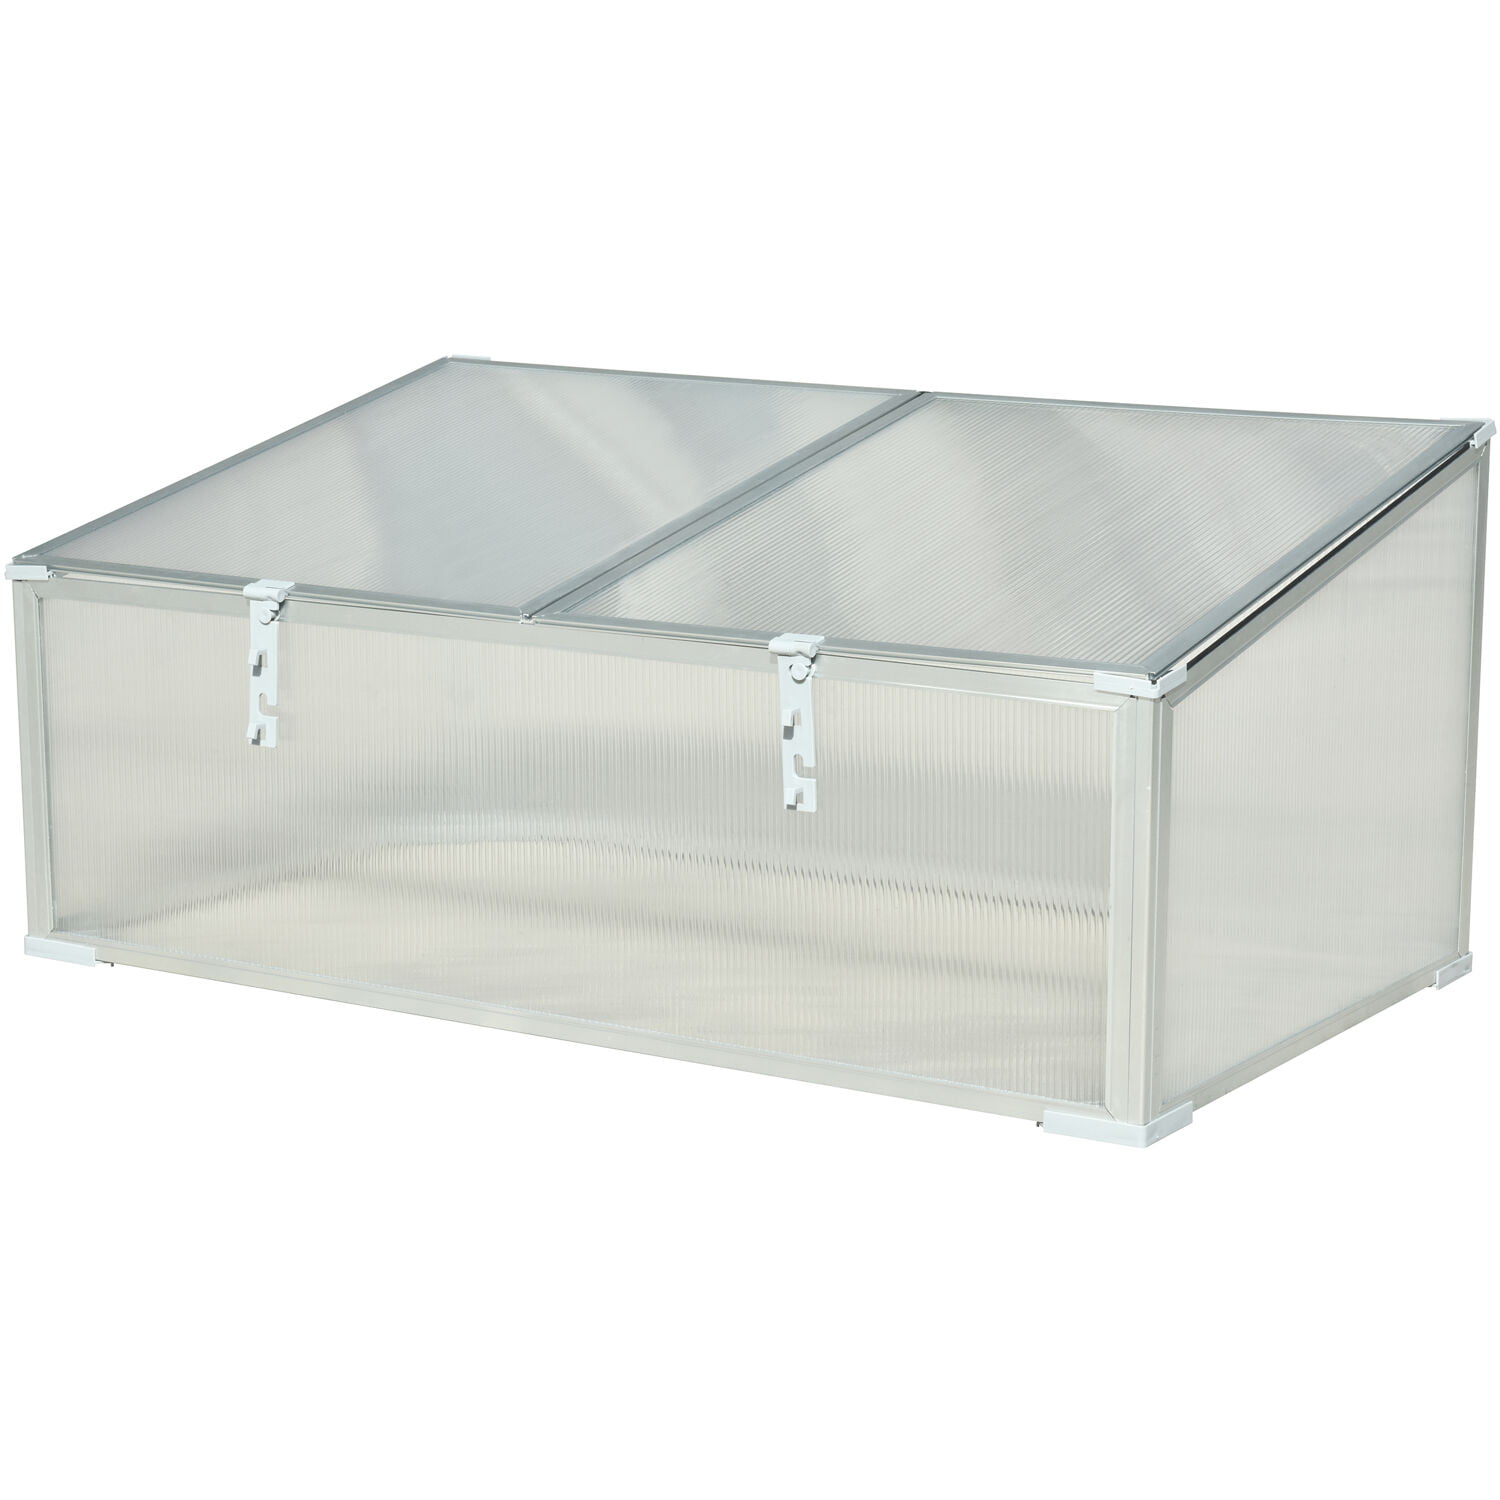 Hanover 39-In. Single Garden Bed Cold Frame Mini-Greenhouse Protector - Lightweight and Portable - Walmart.com